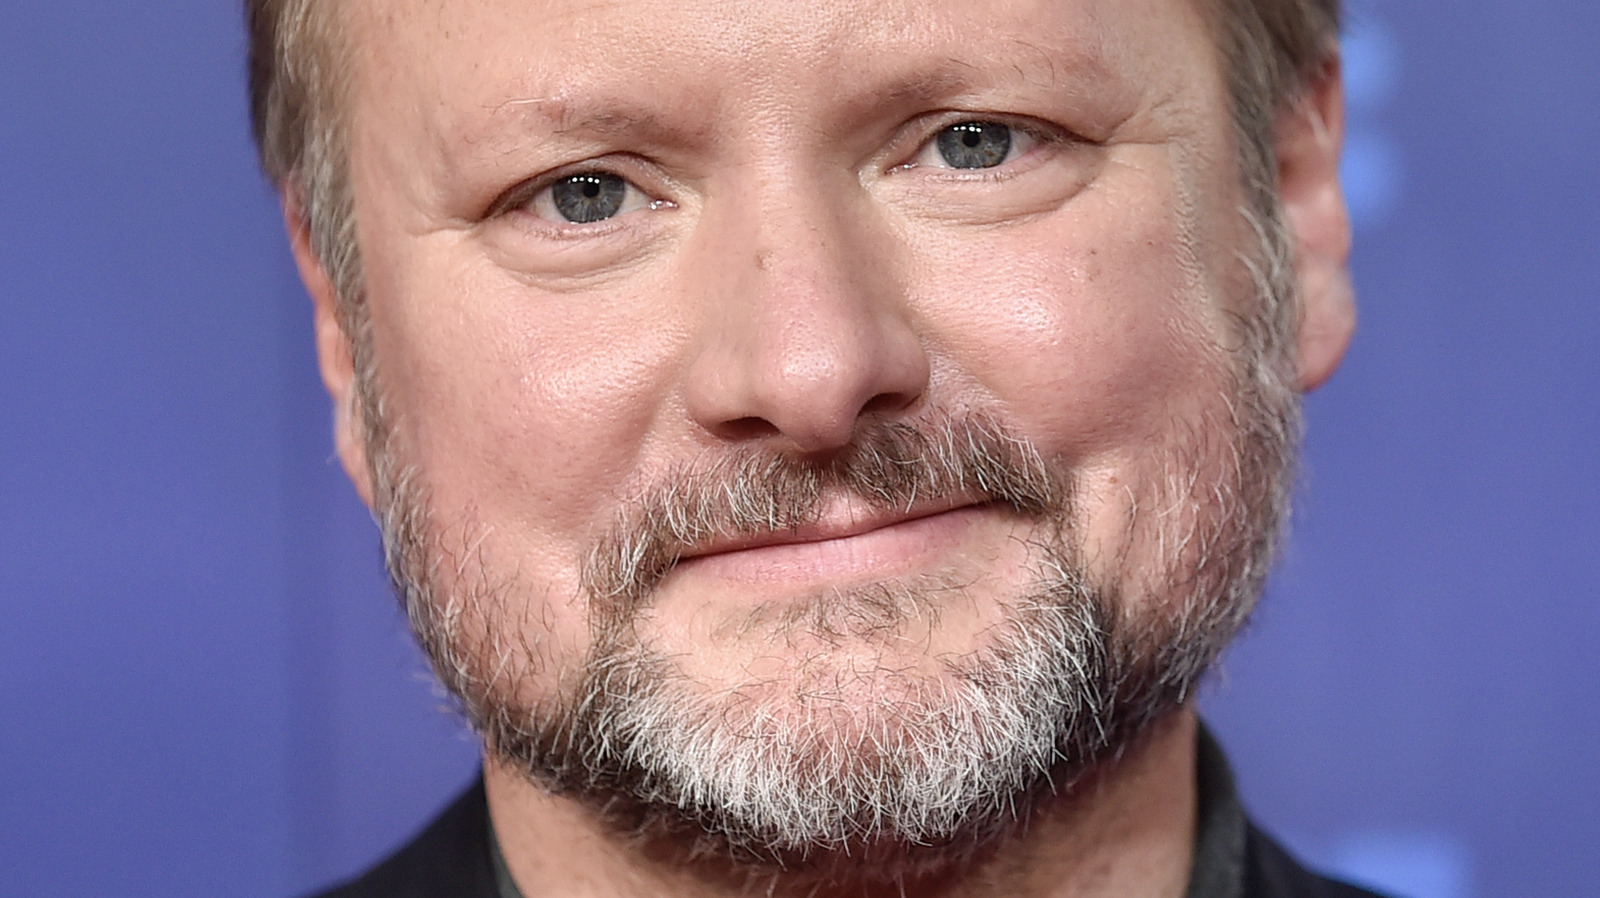 Cedars  Rian Johnson's 'Poker Face' attempts to bring back a